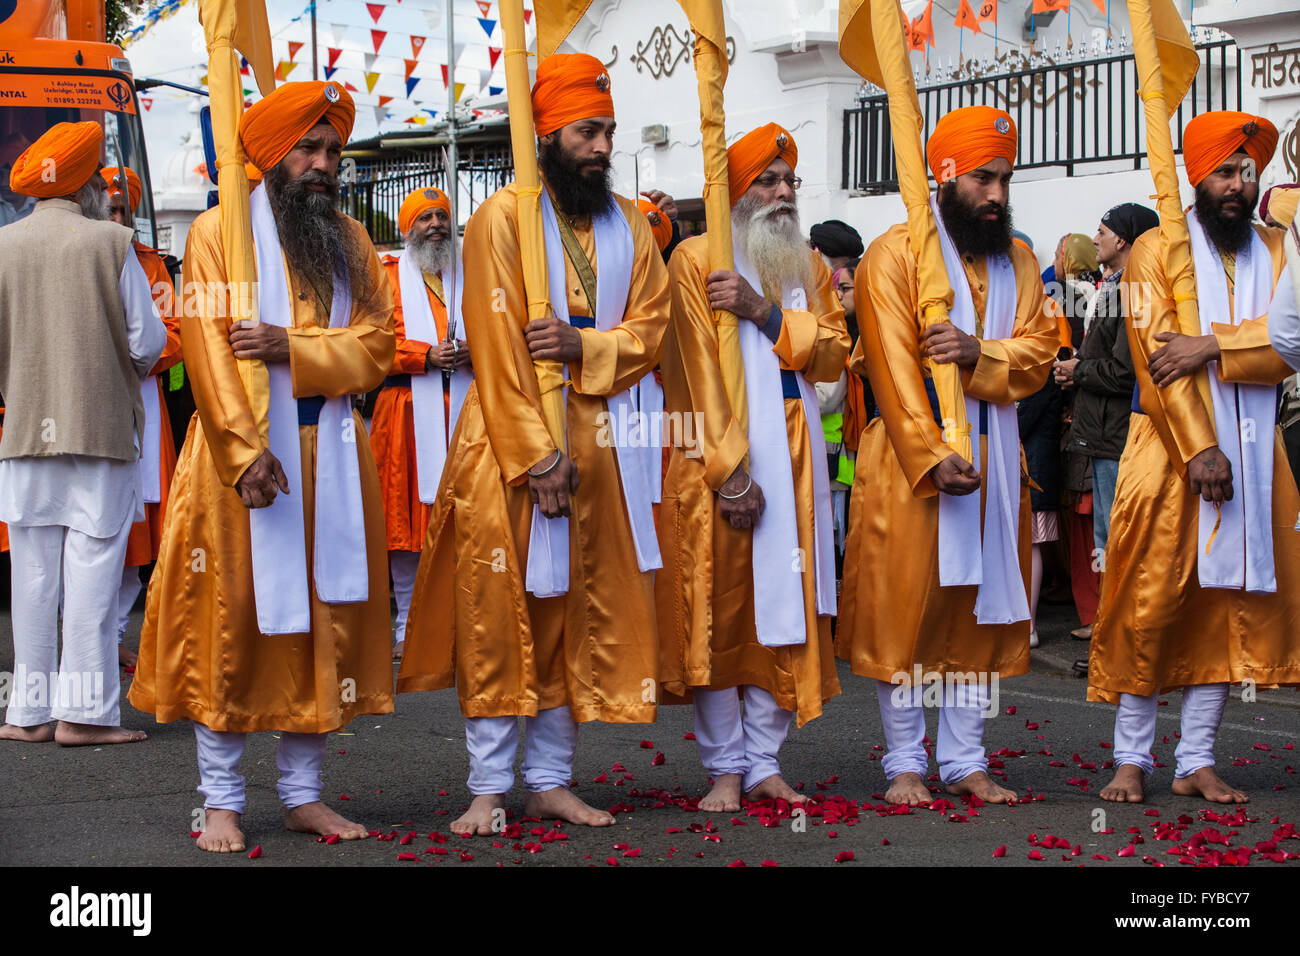 Slough, UK. 24th April 2016. The bearers of the Nishan Sahib and the Panj Pyare (Five Beloved Ones) begin the Vaisakhi Nagar Kirtan procession from the Gurdwara Sri Guru Singh Sabha. Vaisakhi is the holiest day in the Sikh calendar, a harvest festival marking the creation of the community of initiated Sikhs known as the Khalsa. Credit:  Mark Kerrison/Alamy Live News Stock Photo